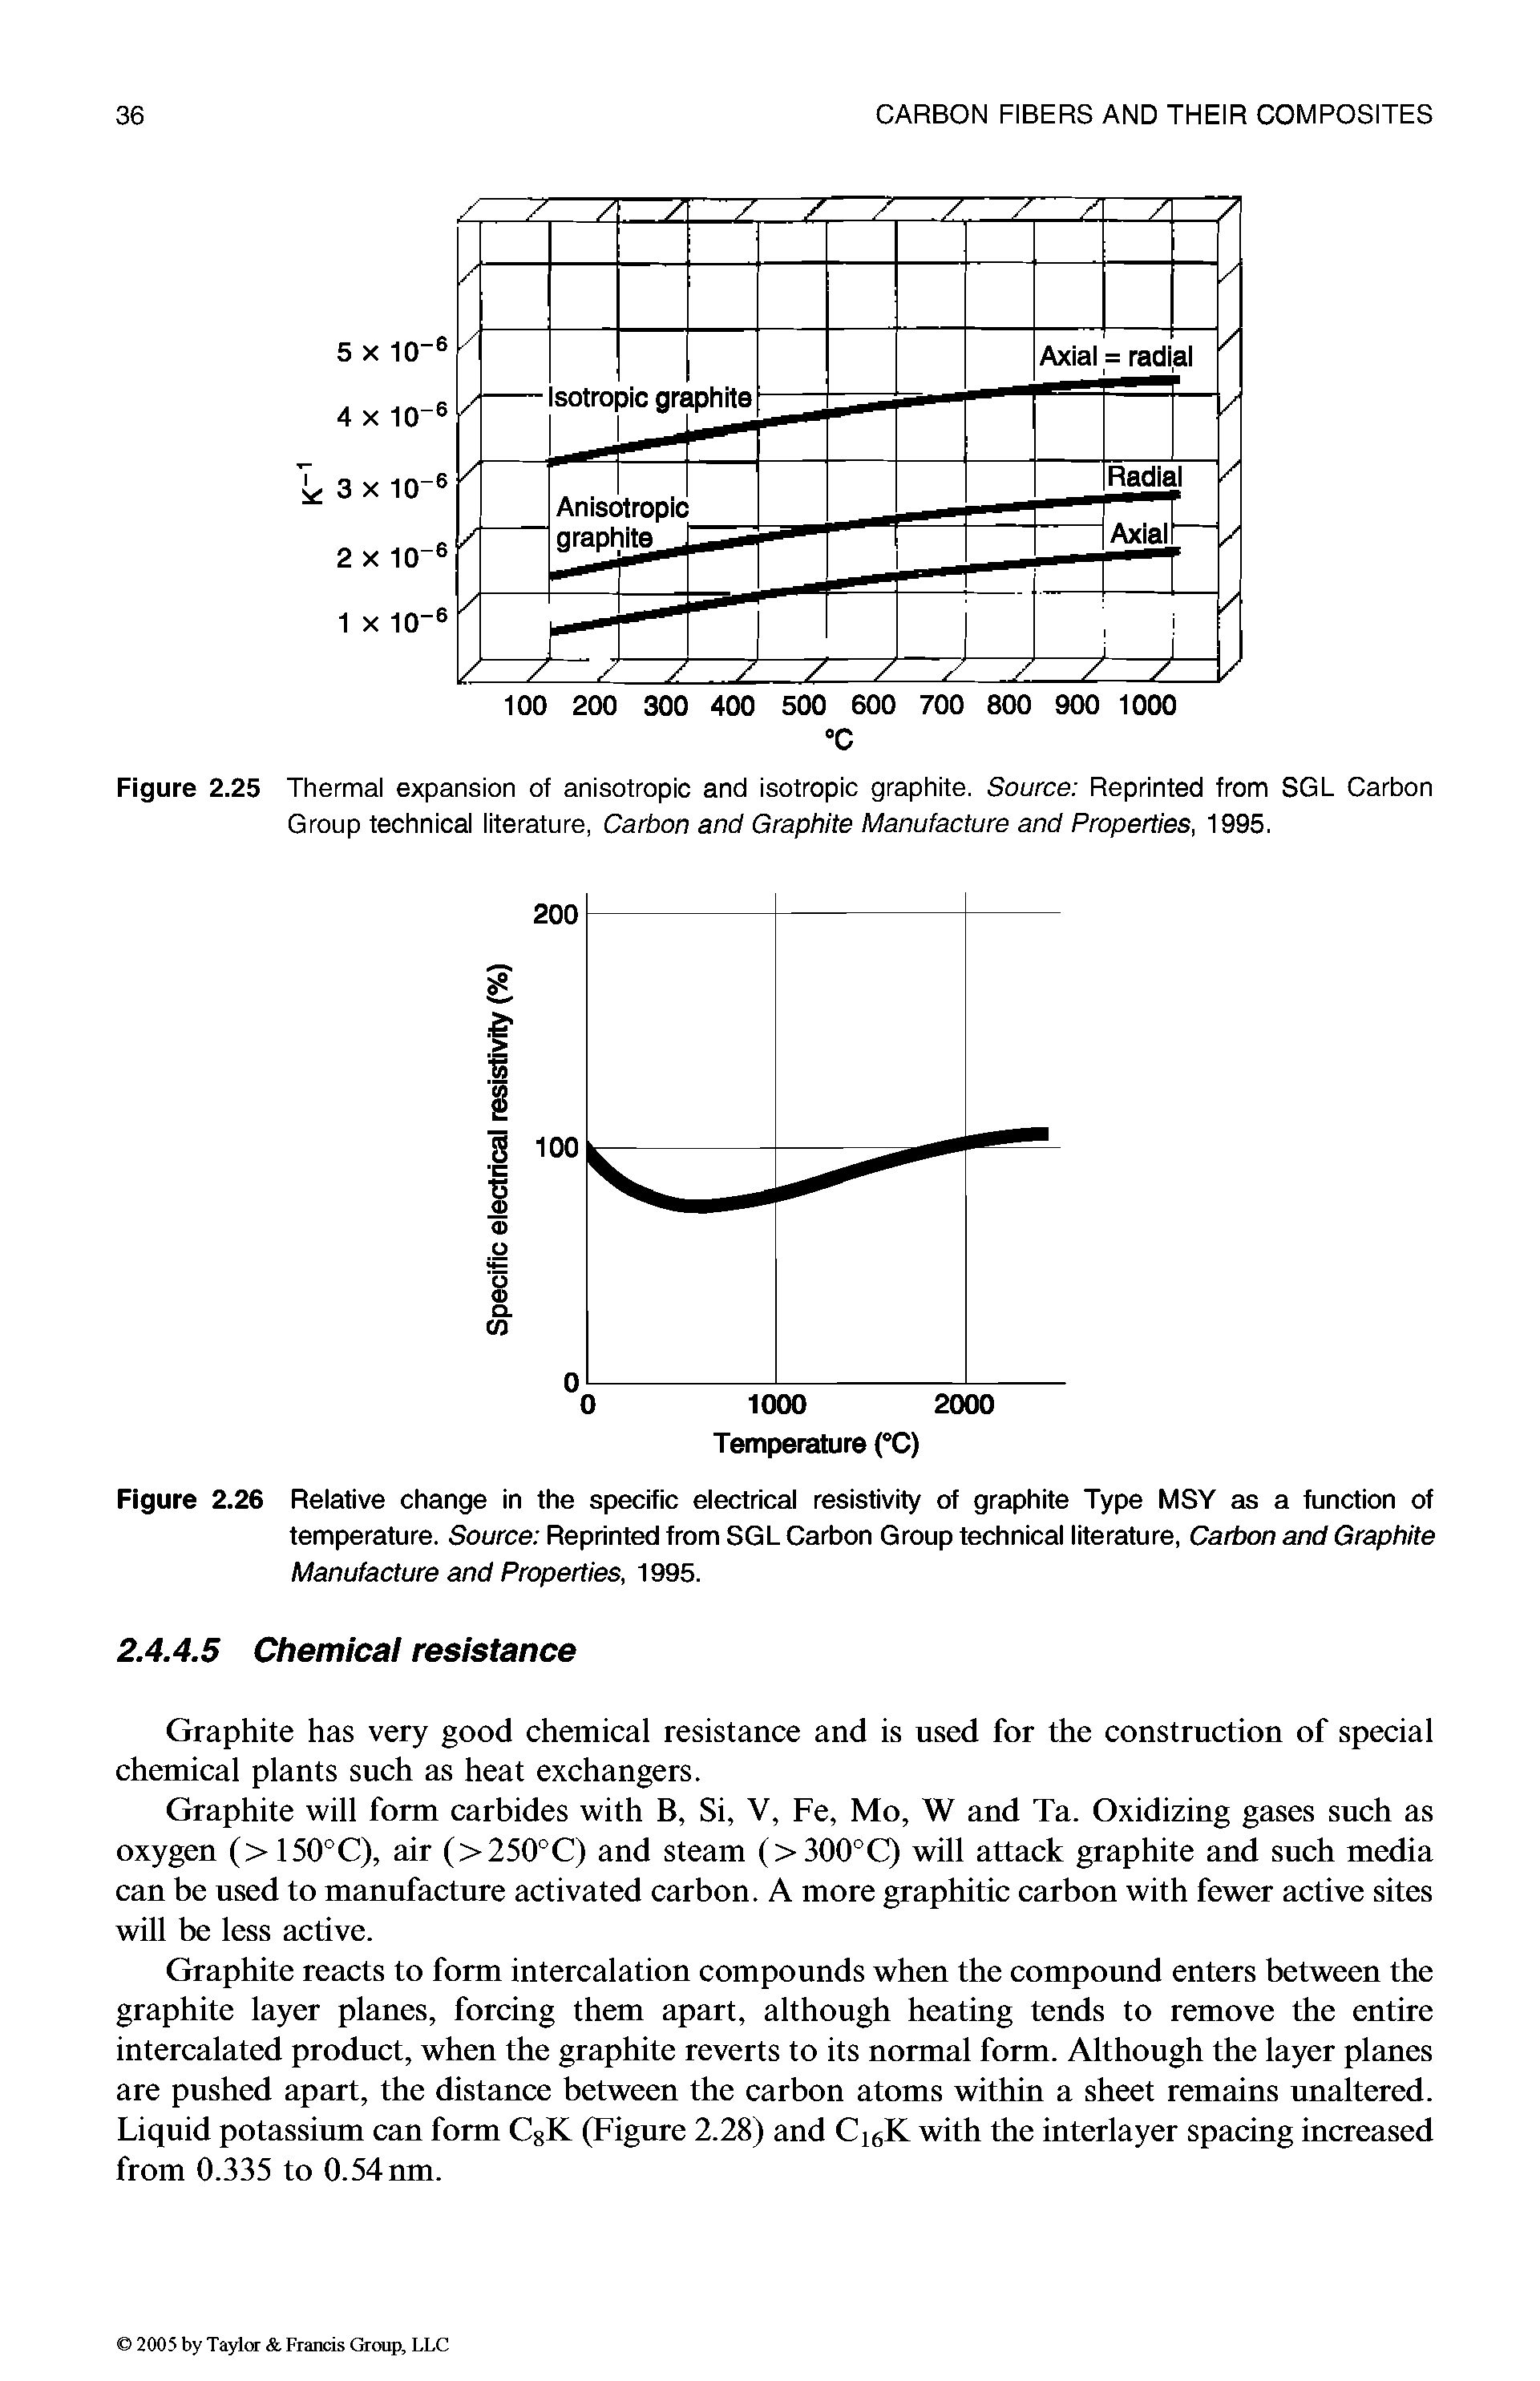 Figure 2.26 Relative change in the specific electrical resistivity of graphite Type MSY as a function of temperature. Source Reprinted from SGL Carbon Group technical literature, Carbon and Graphite Manufacture and Properties, 1995.